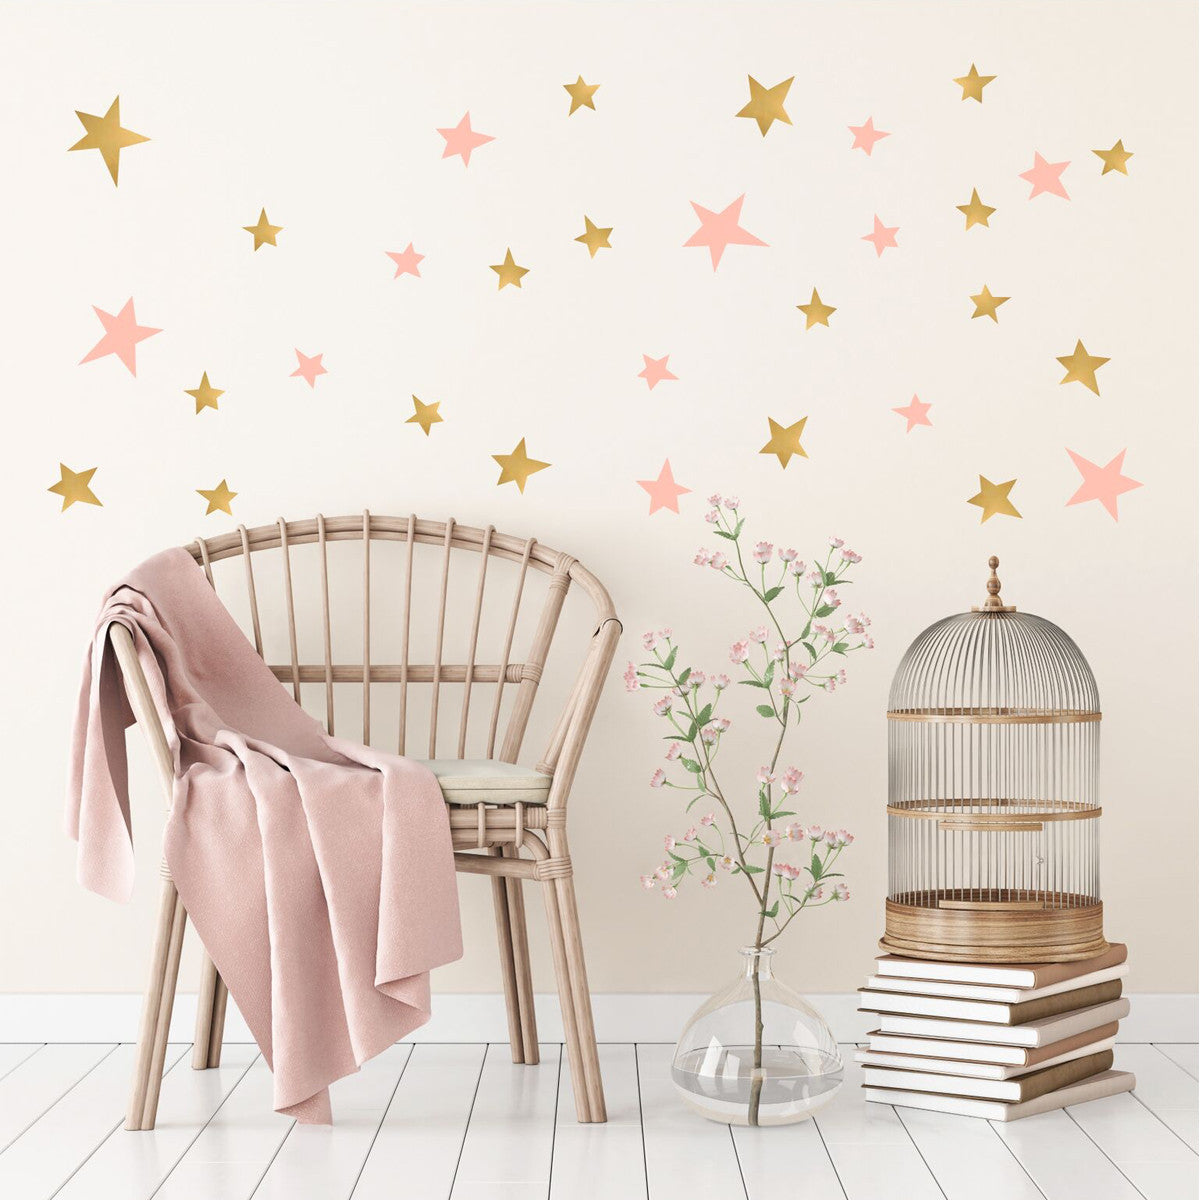 deer industries kids lifestyle bedroom wall decor wall decals pom stars gold rose pink